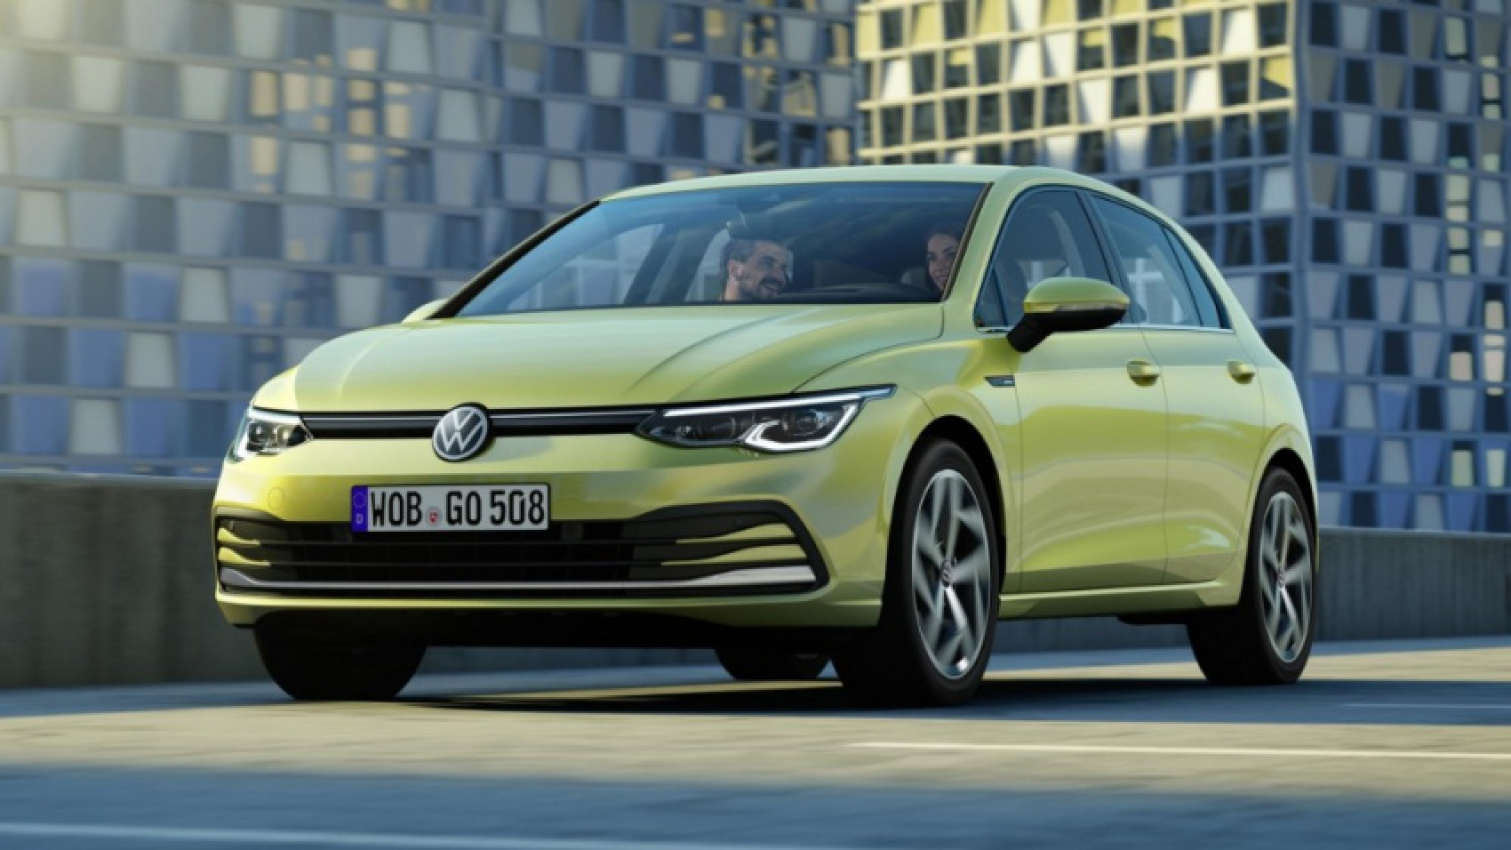 autos, cars, volkswagen, autos volkswagen, volkswagen golf mk8 to arrive in markets from december onwards